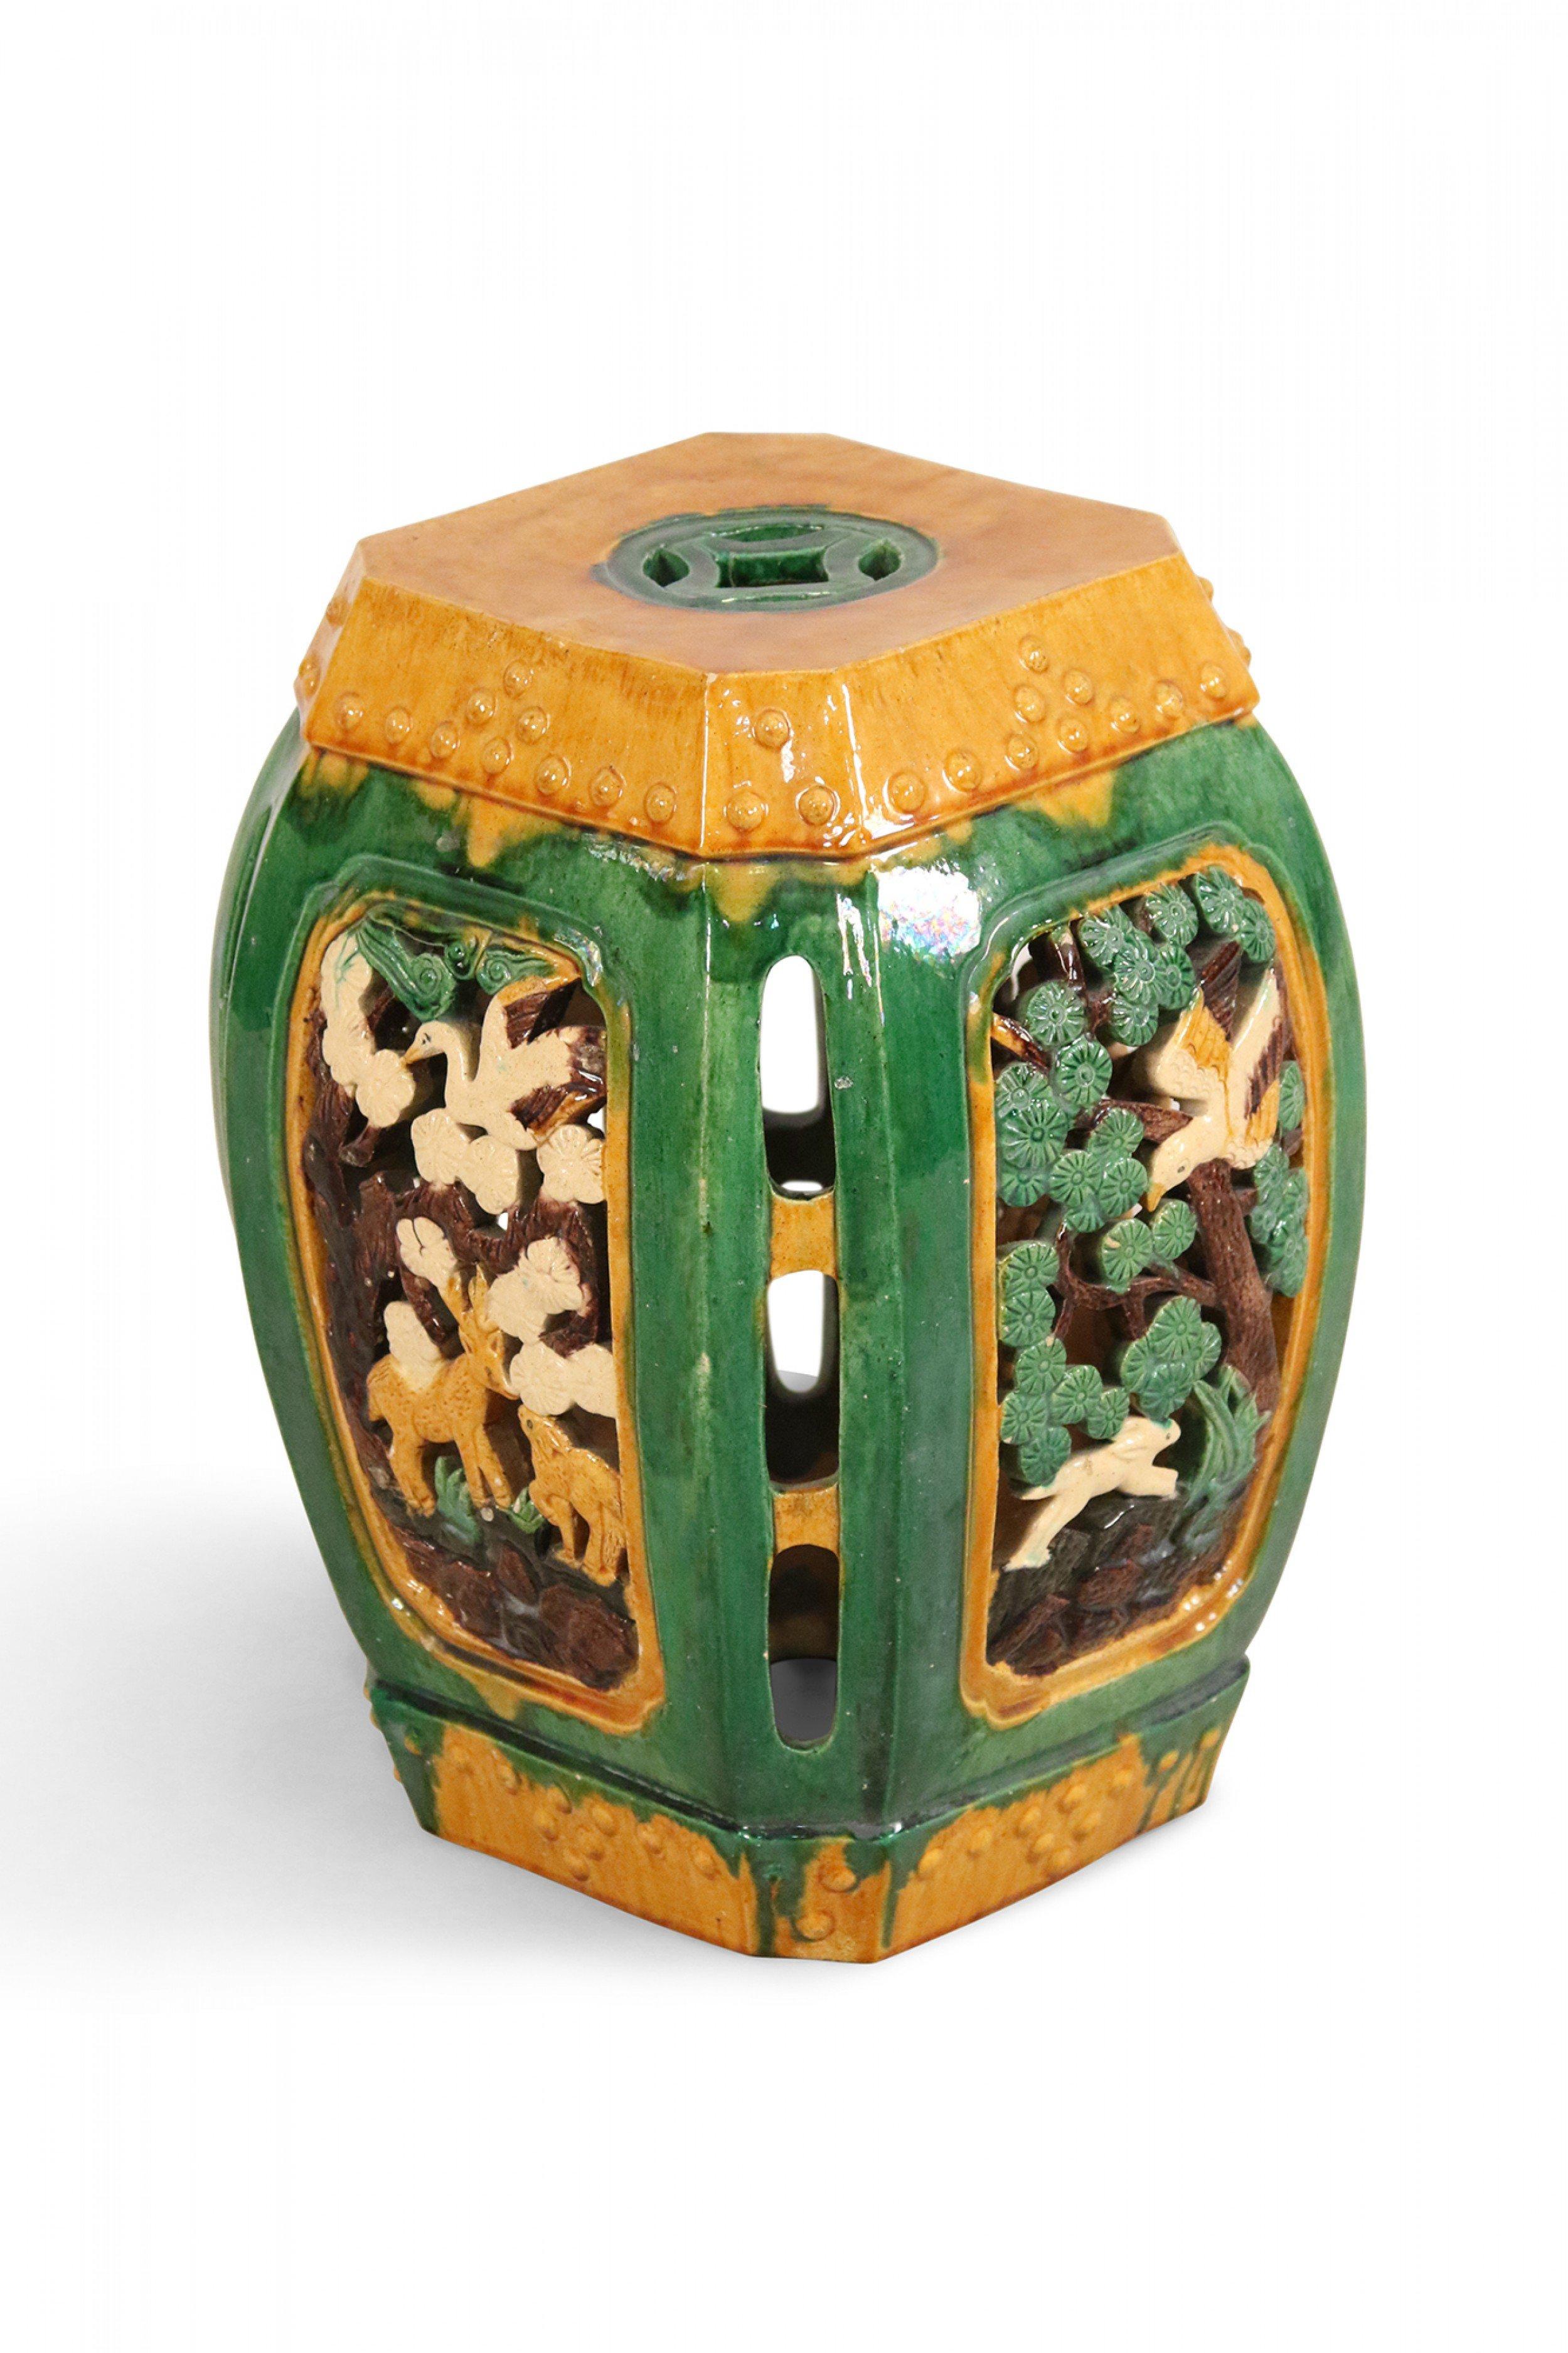 Chinese (19th-20th century) ceramic garden seat with filigree panels having a reticulated animal and floral design with a yellow and green glazed finish.